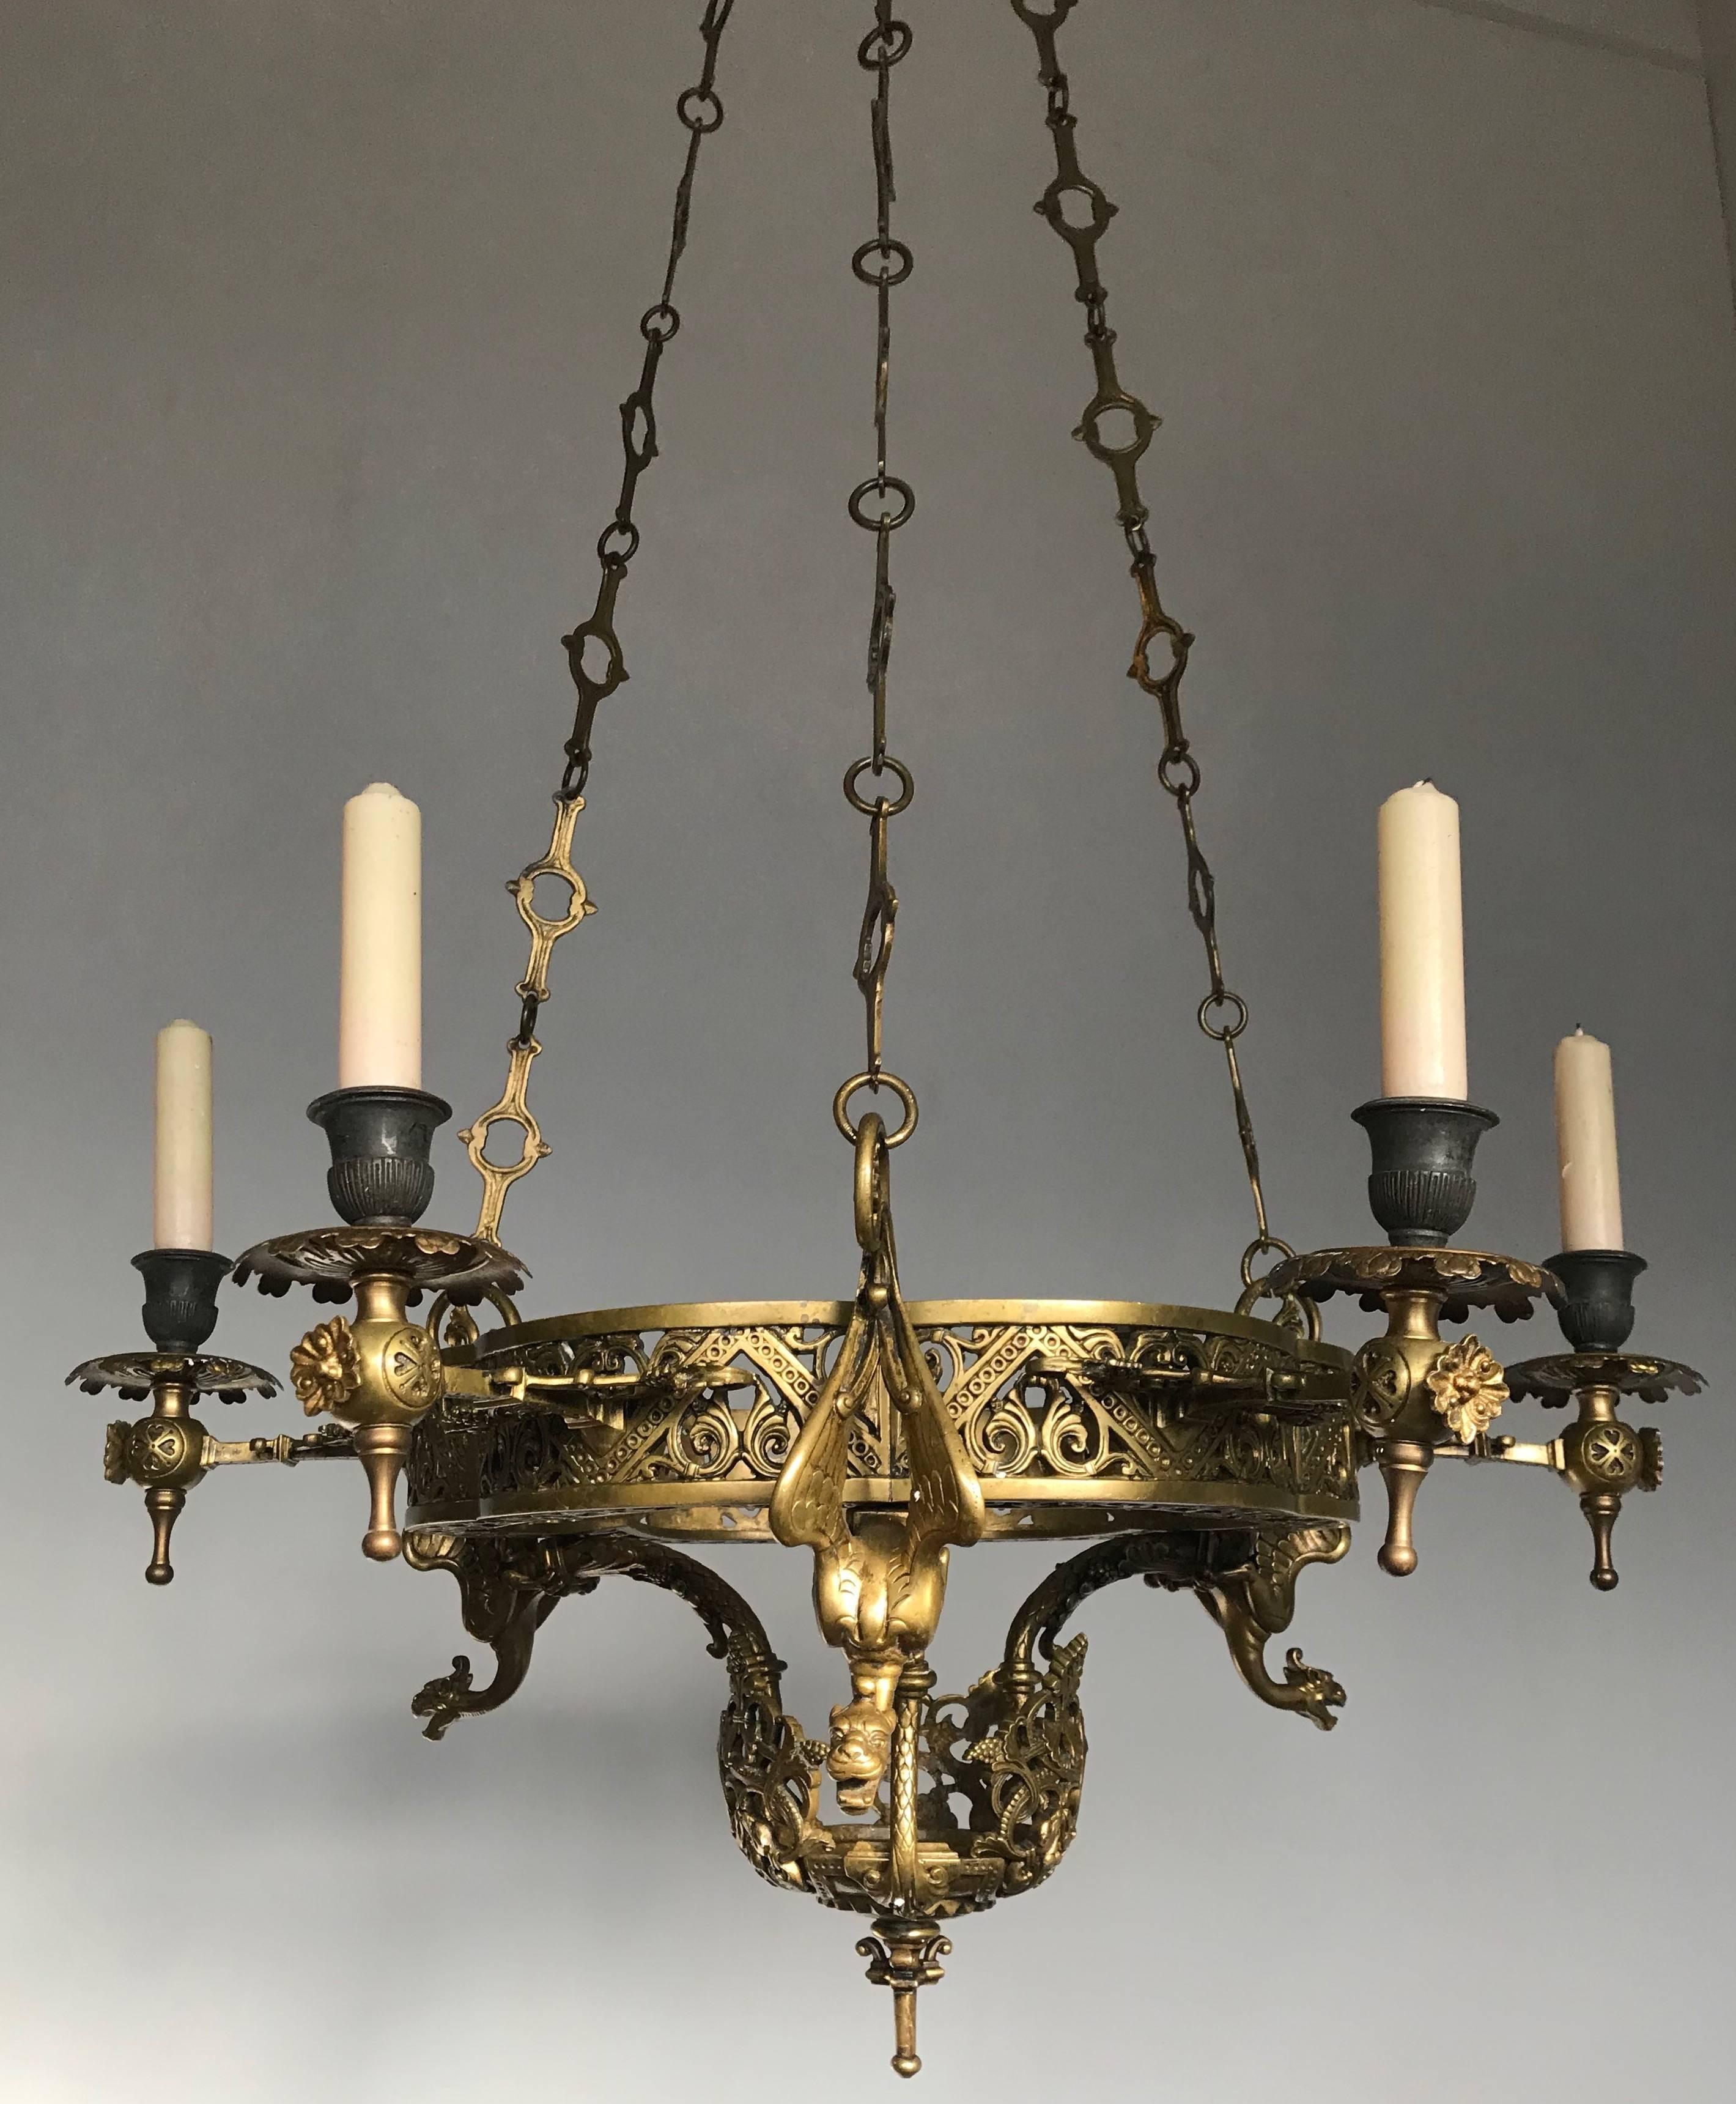 Stunning and early bronze chandelier for candles.

In antiques it very often is the case that how older the piece is, the better the quality and the details. This early, rare and decorative Gothic style chandelier is no exception to that rule. You